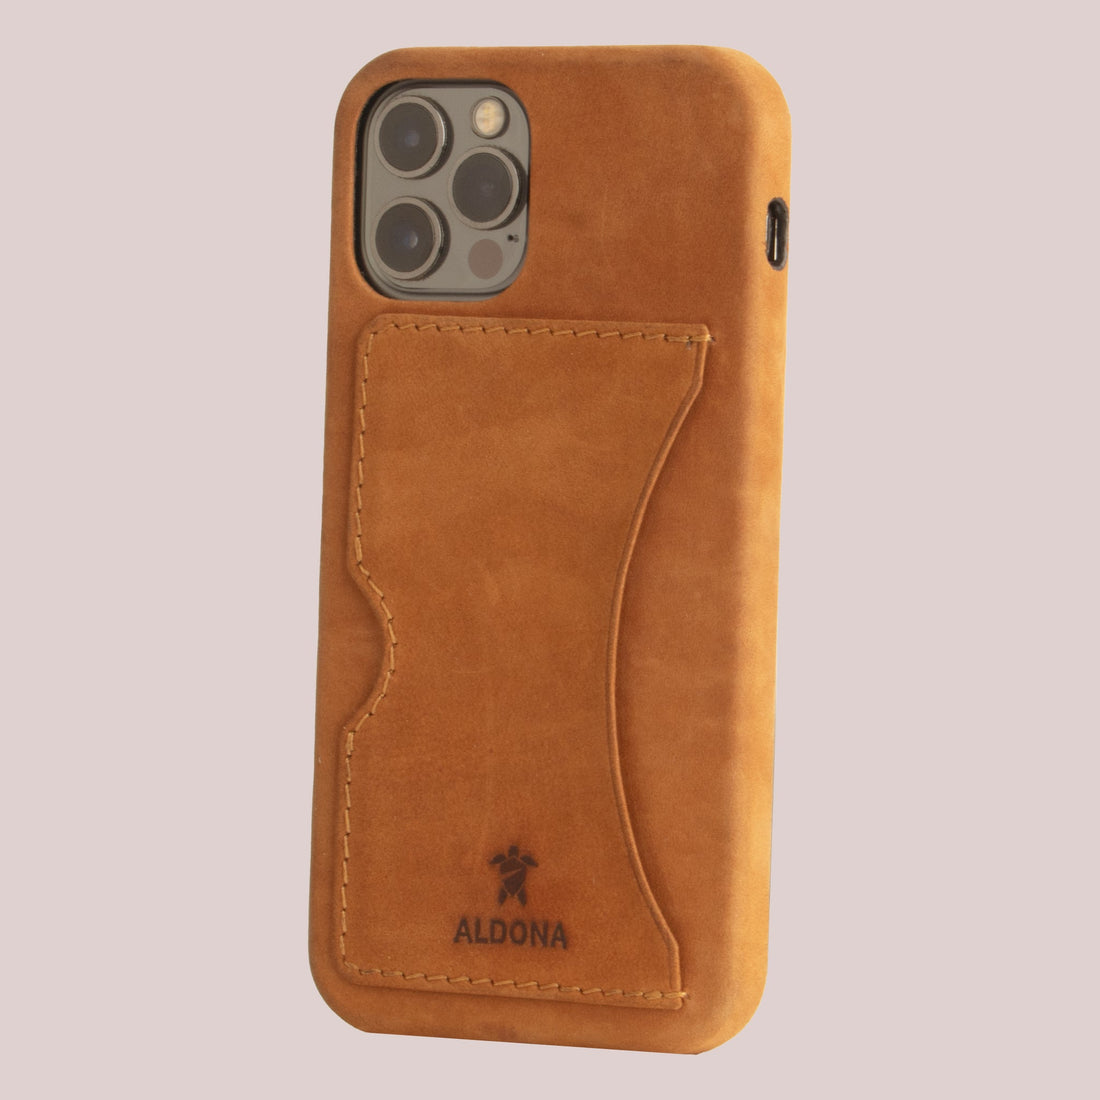 Baxter Card Case for iPhone 13 Pro Max - Burnt Tobacco